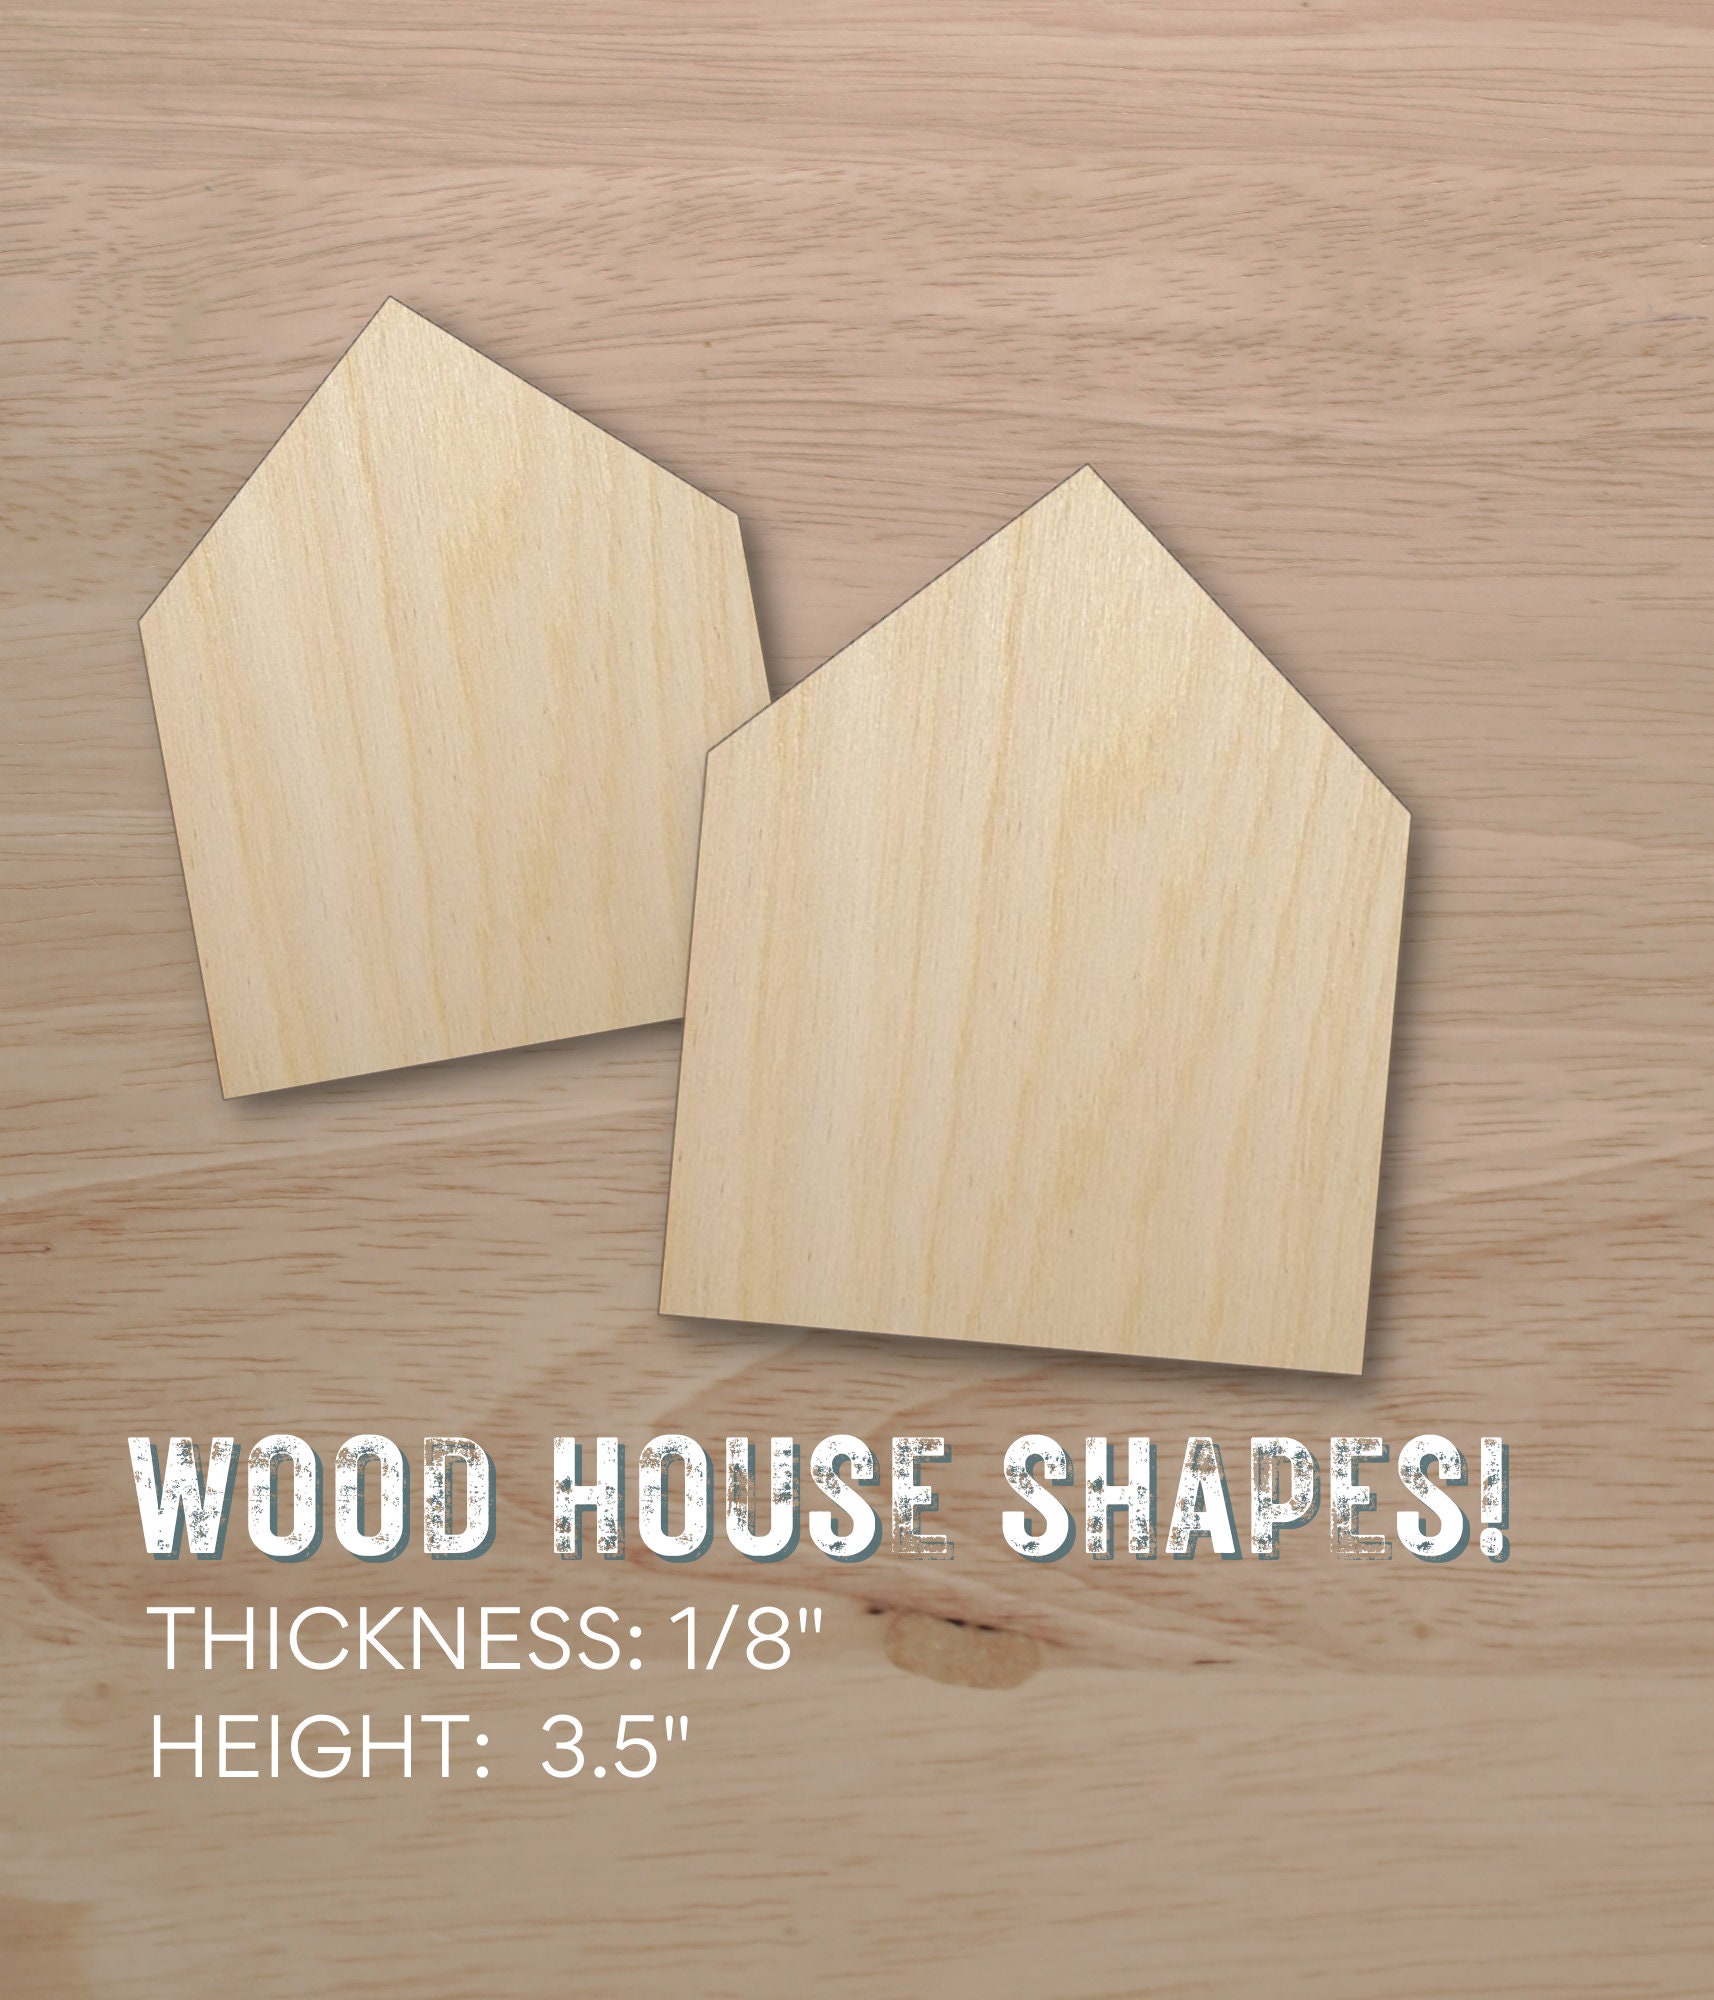 26 Wood shapes ideas  shapes, wood crafts, crafts